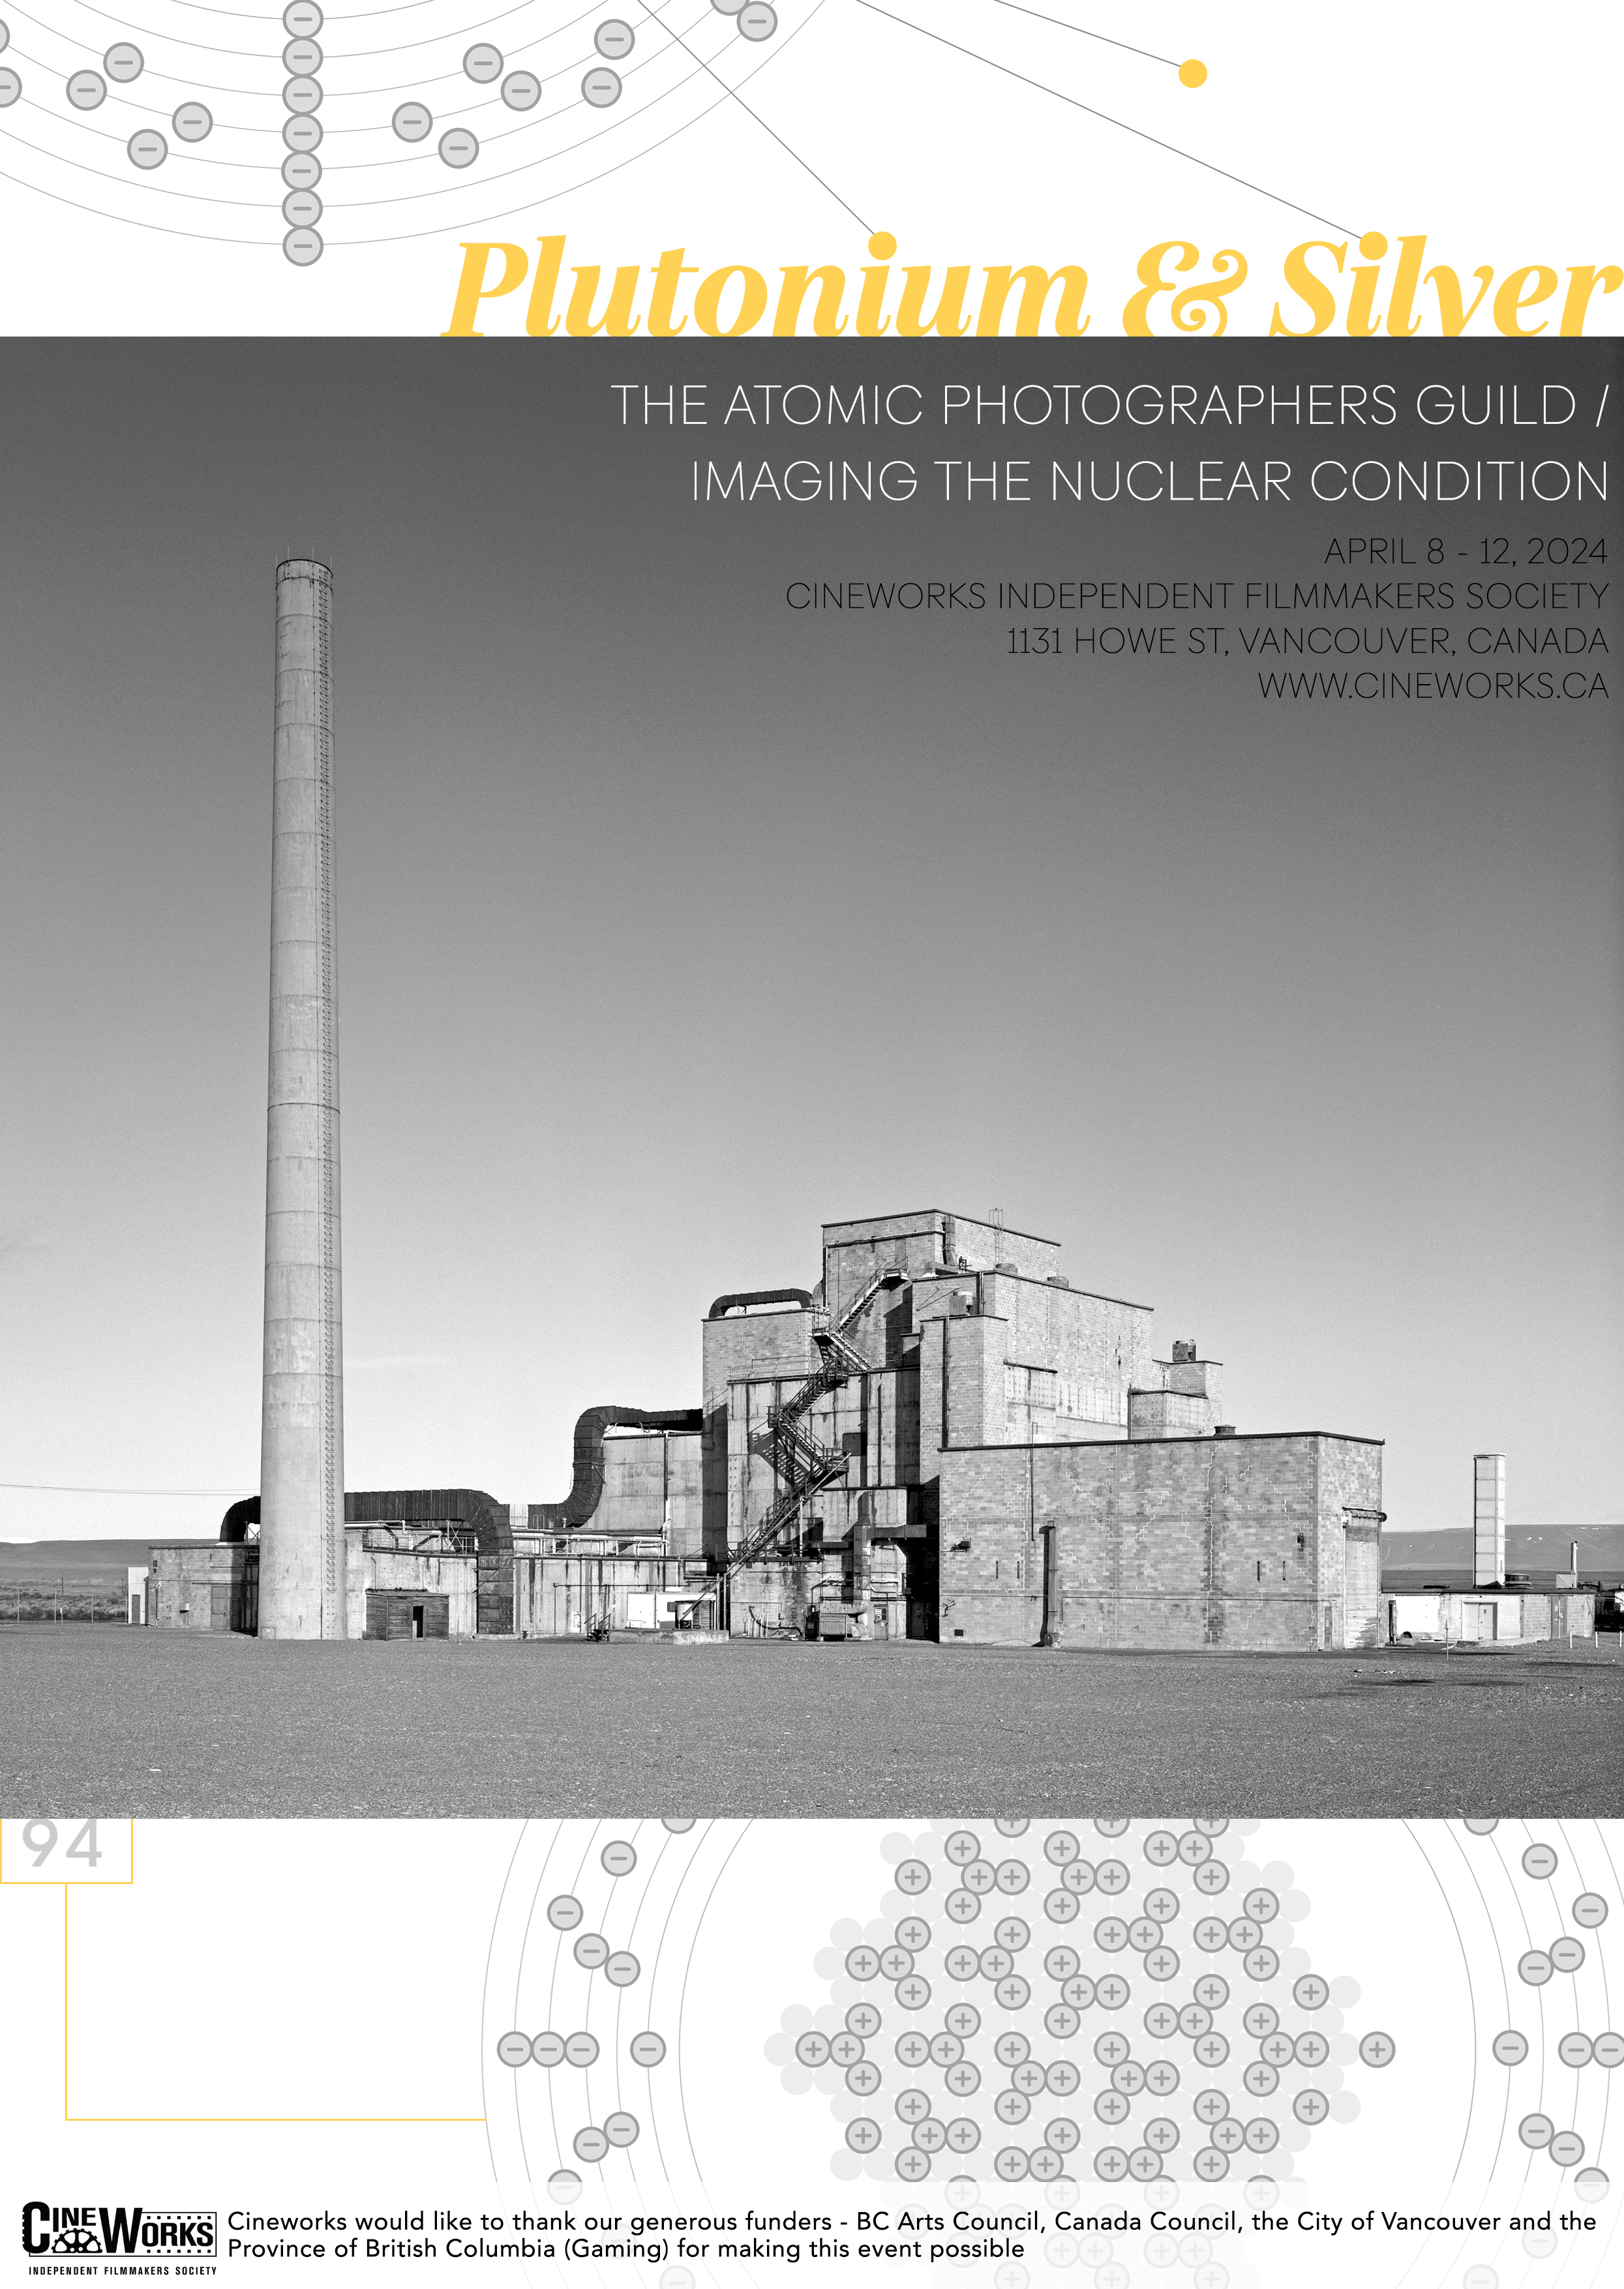 The Atomic Photographers Guild - Imaging The Nuclear Condition